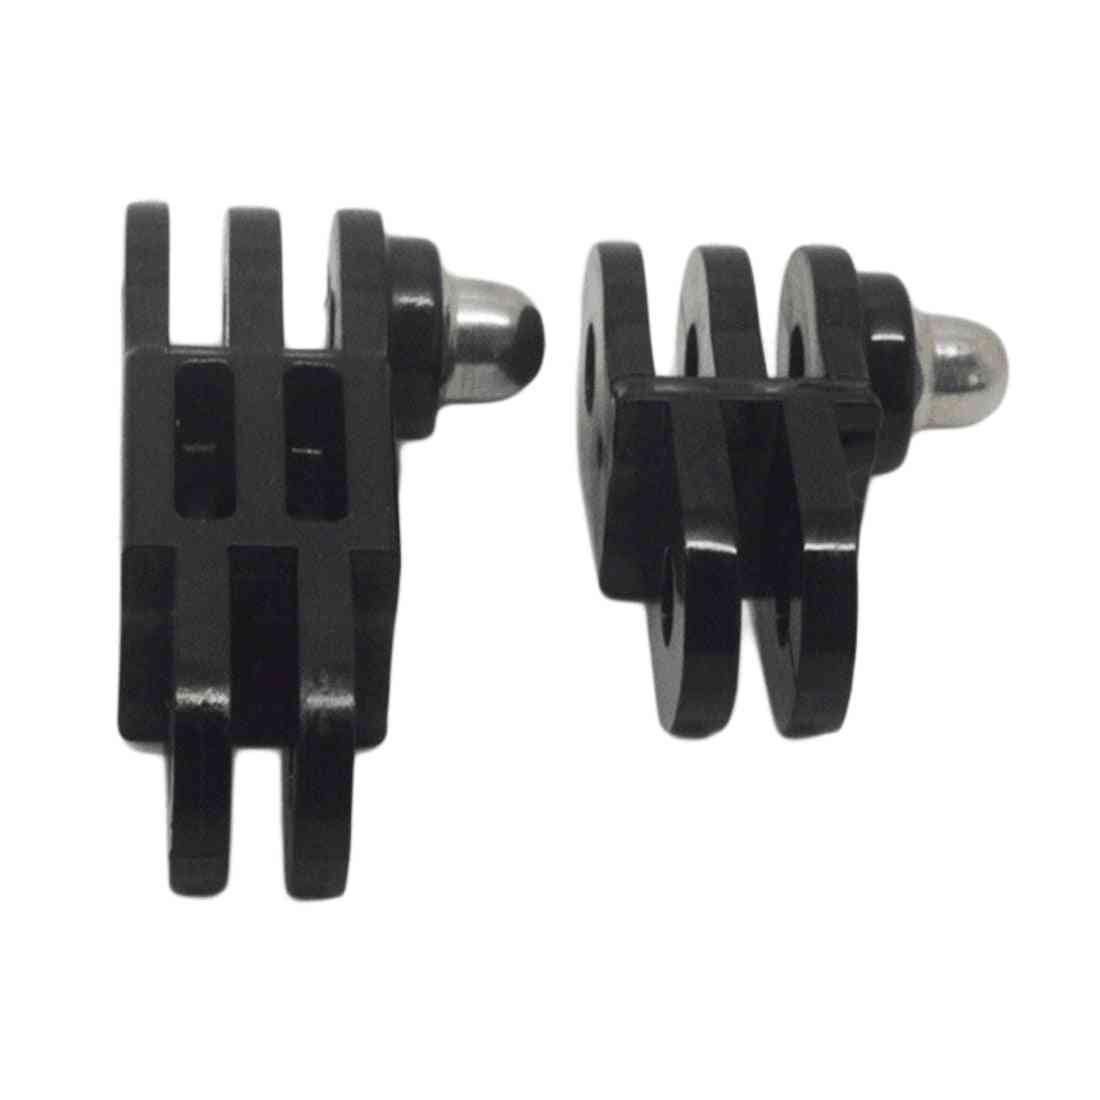 Long / Short Straight Joint Adapter Mount Set For Gopro Hero Camera Accessories